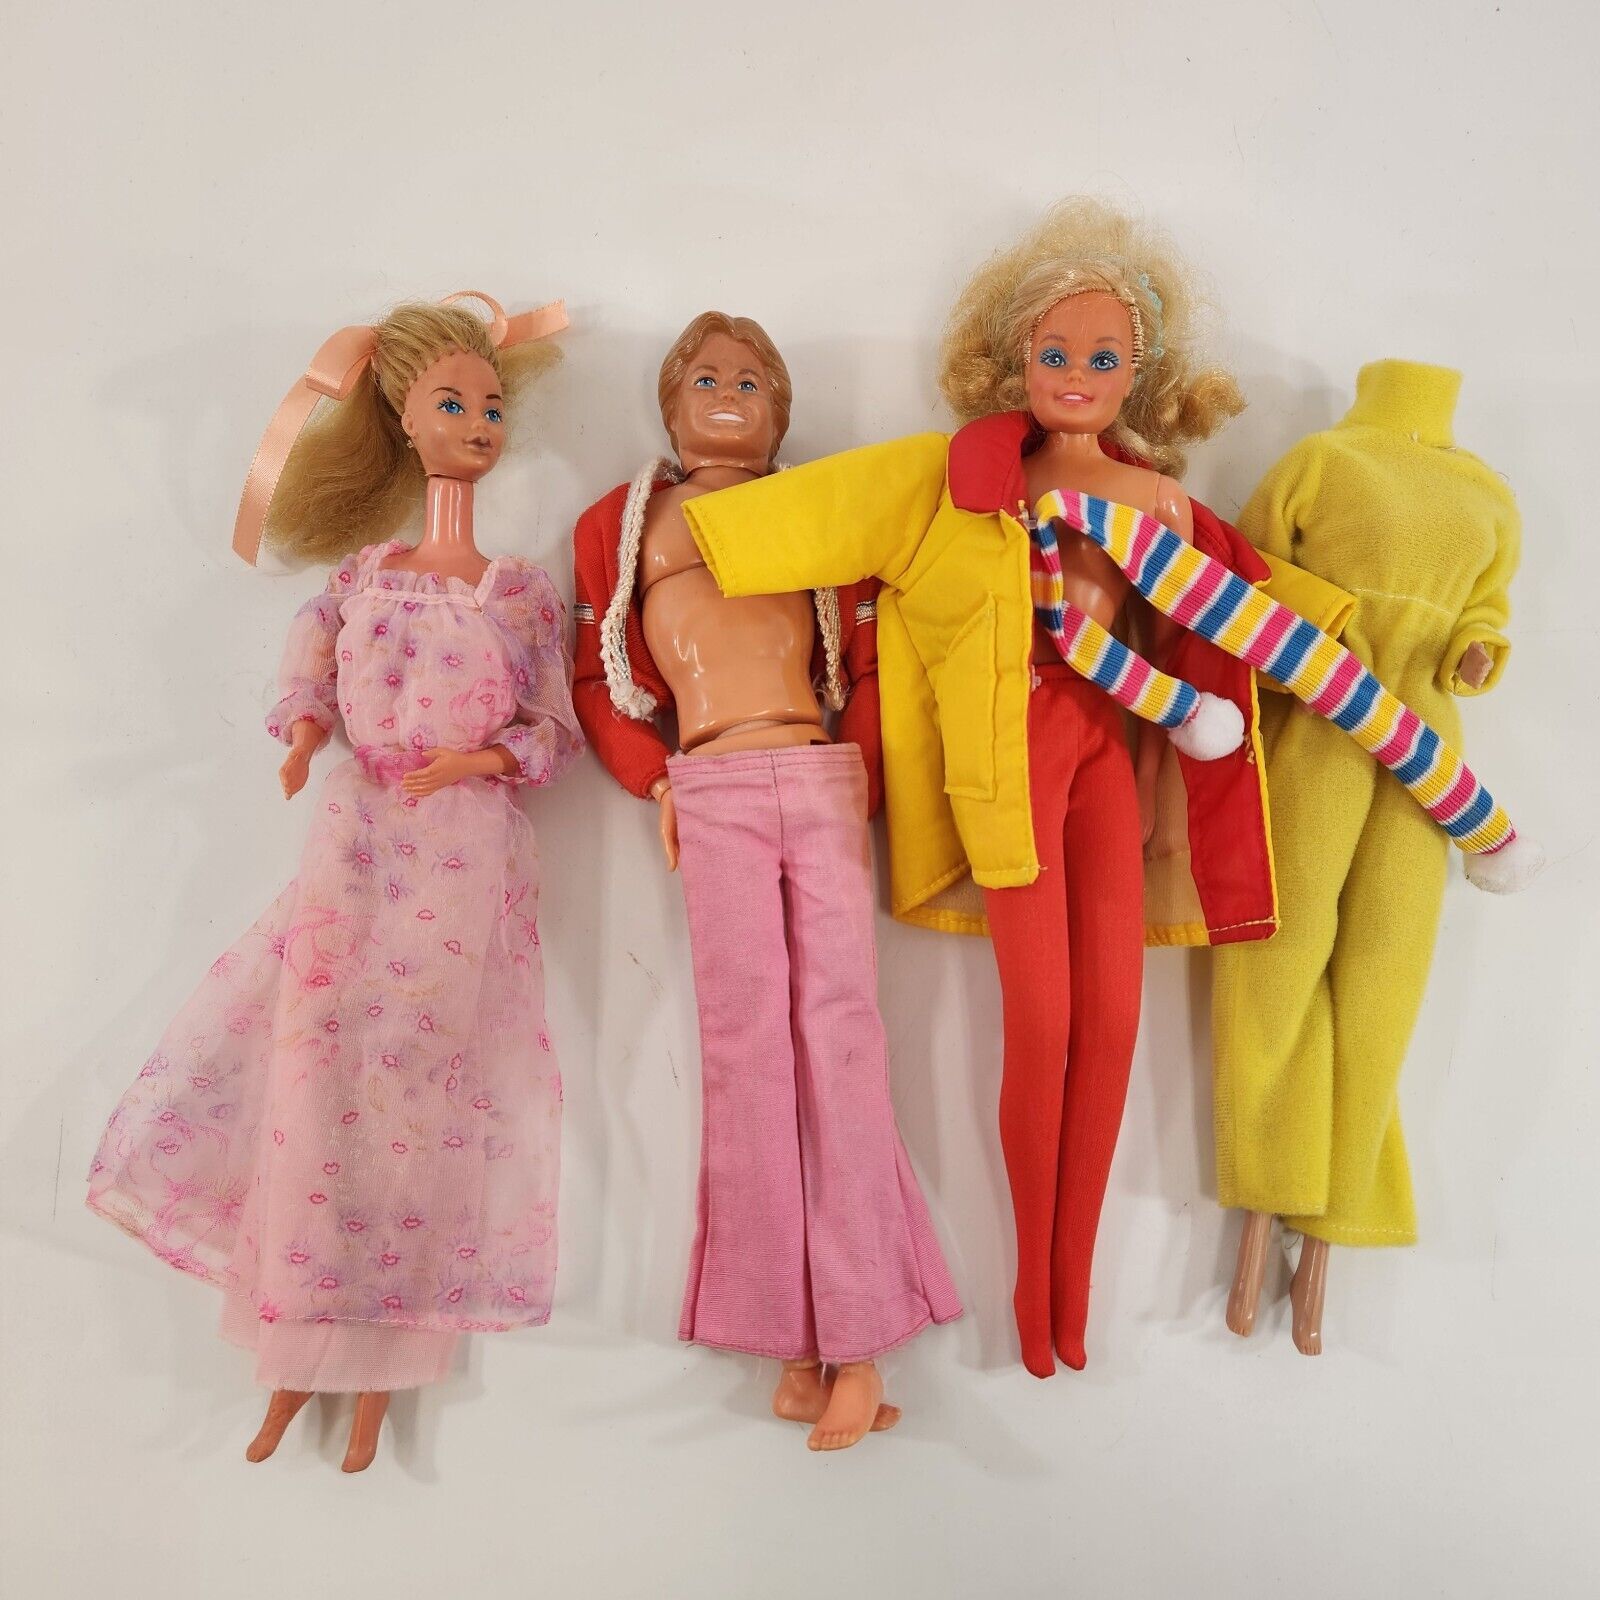 Primary image for Barbie Doll Lot Kissing Fashion Play Shaun + Outfits Vtg 1980s Mattel